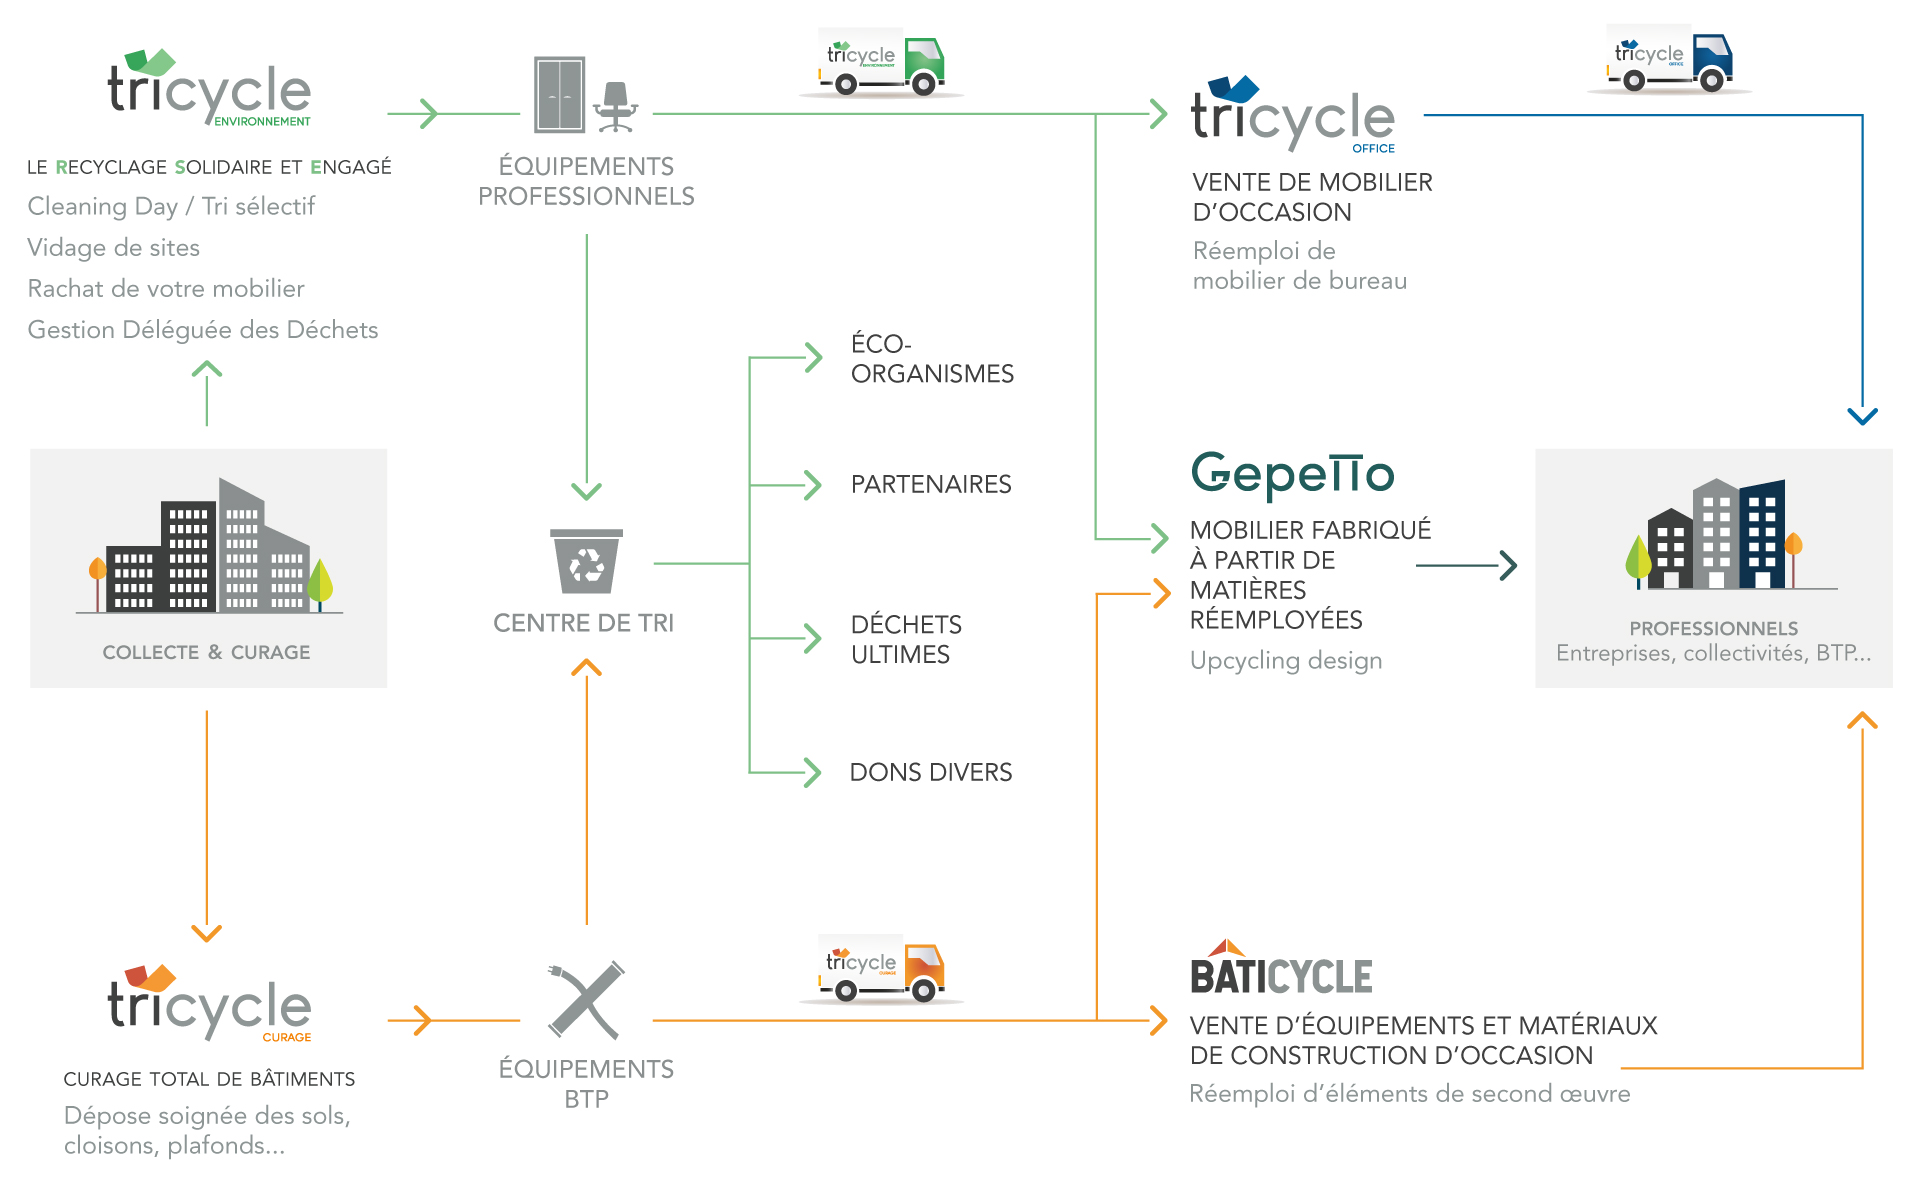 tricycle-recyclage-reemploi-upcycling-insertion-curage-schema-global-septembre-2023